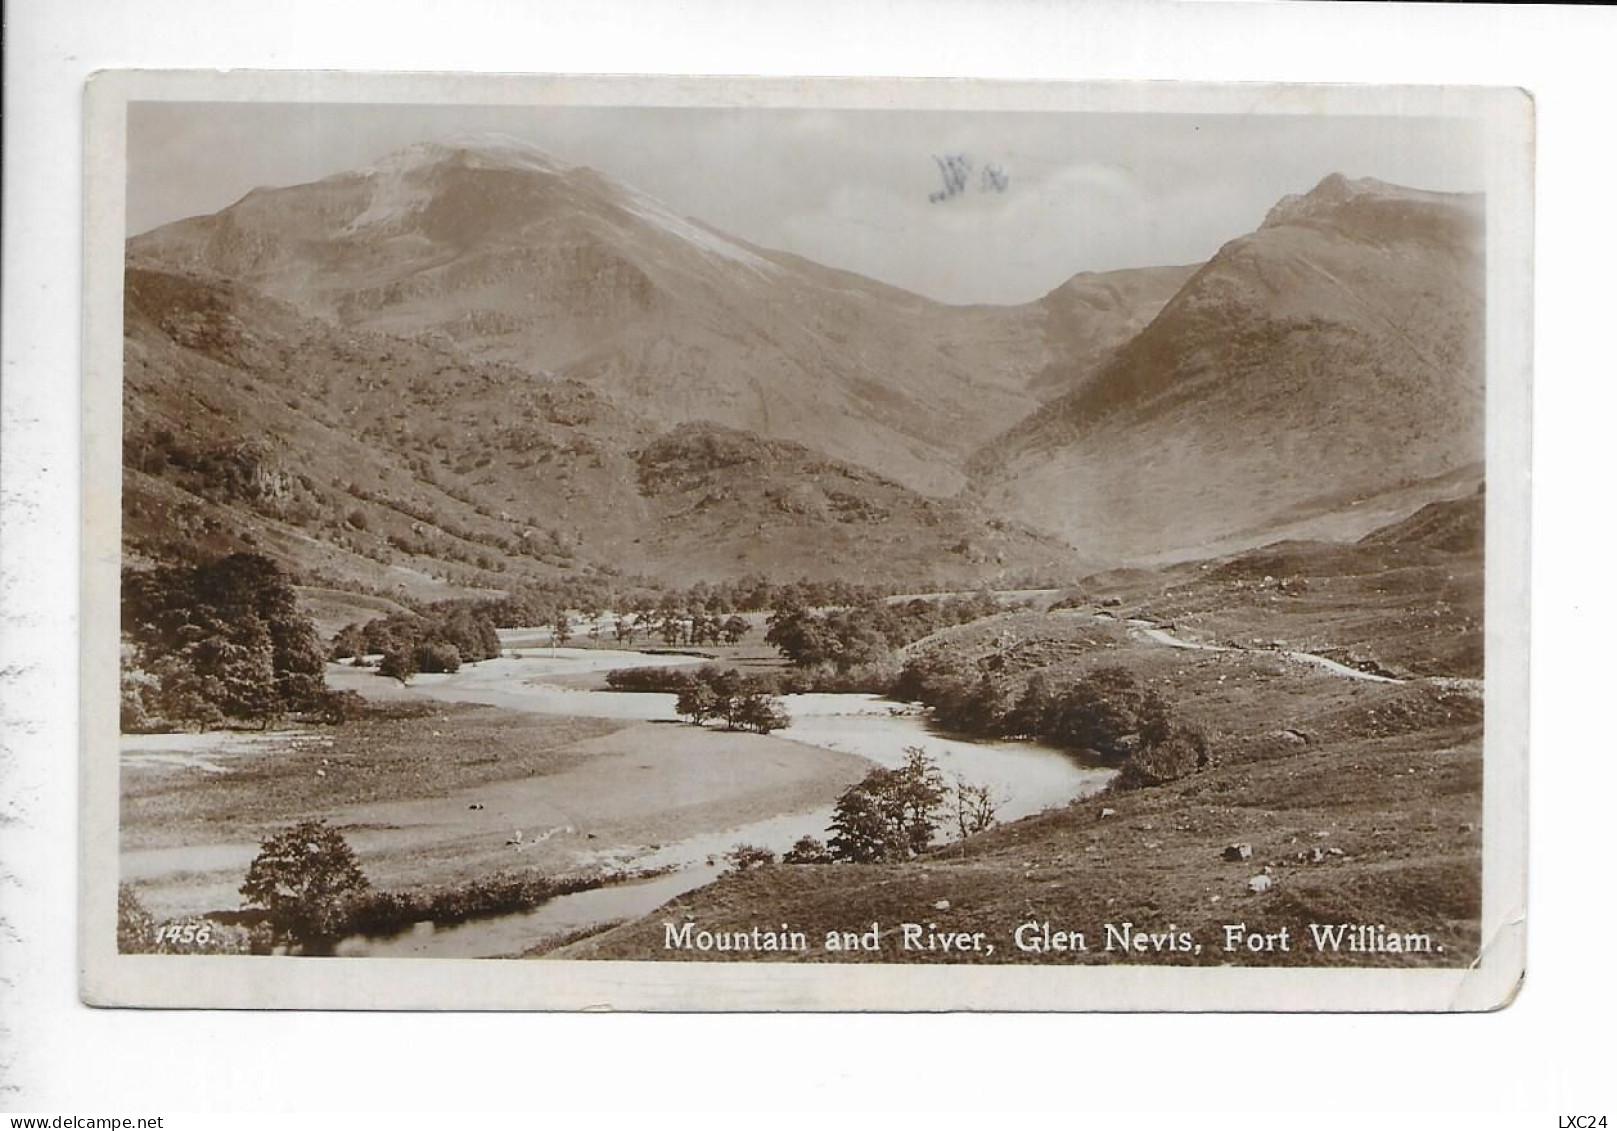 MOUNTAIN AND RIVER. GLEN NEVIS. FORT WILLIAM. - Inverness-shire